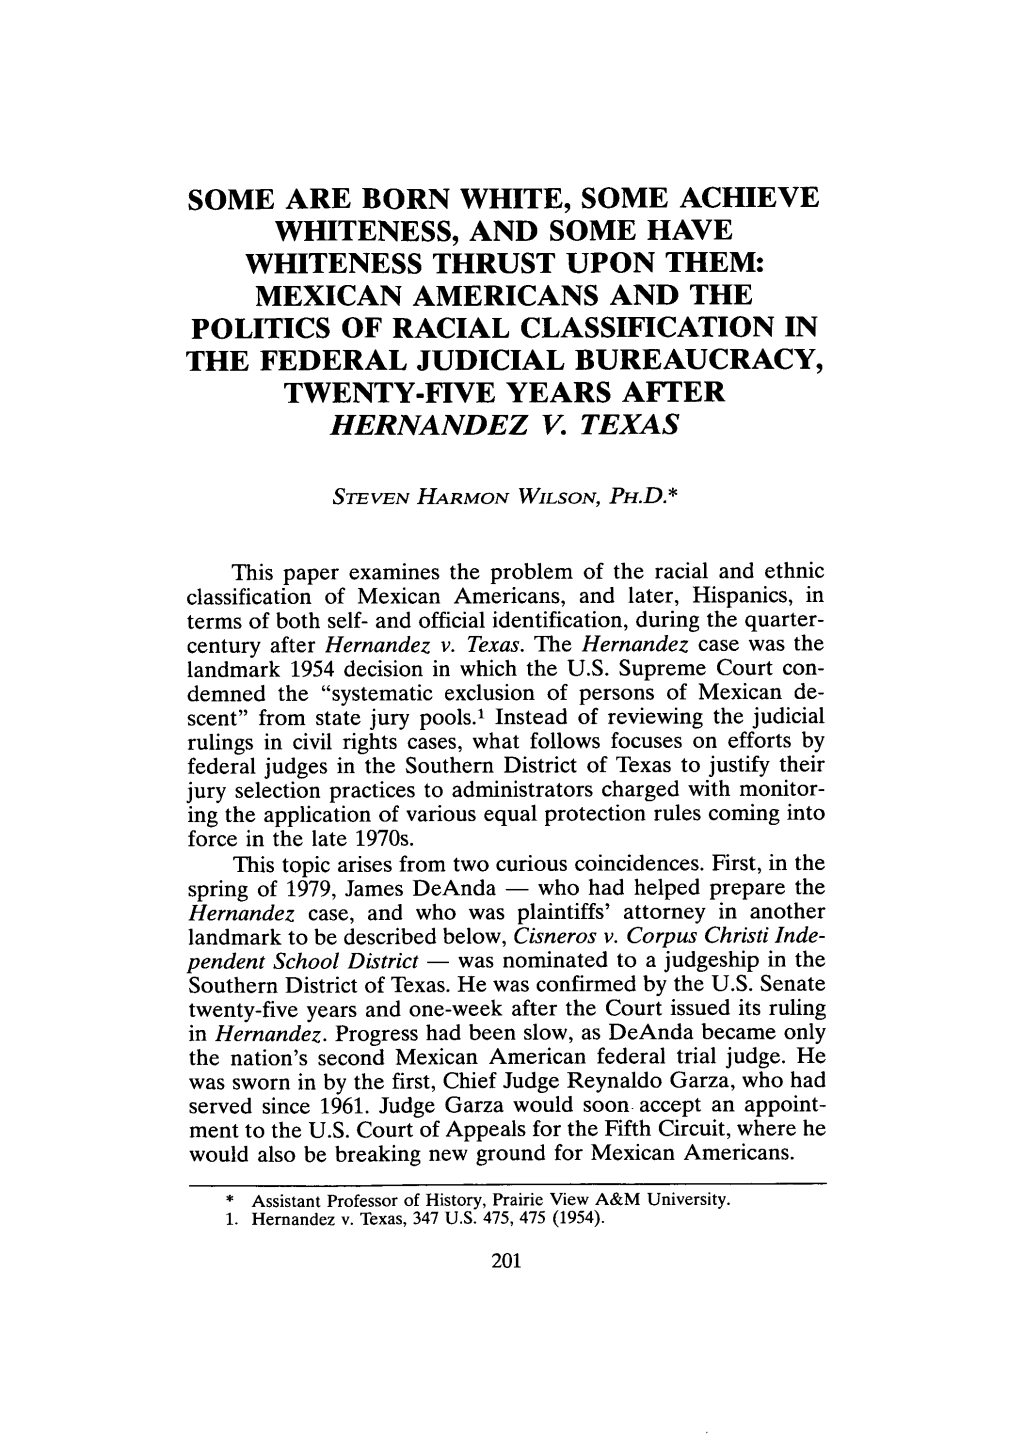 Mexican Americans and the Politics of Racial Classification in the Federal Judicial Bureaucracy, Twenty-Five Years After Hernandez V